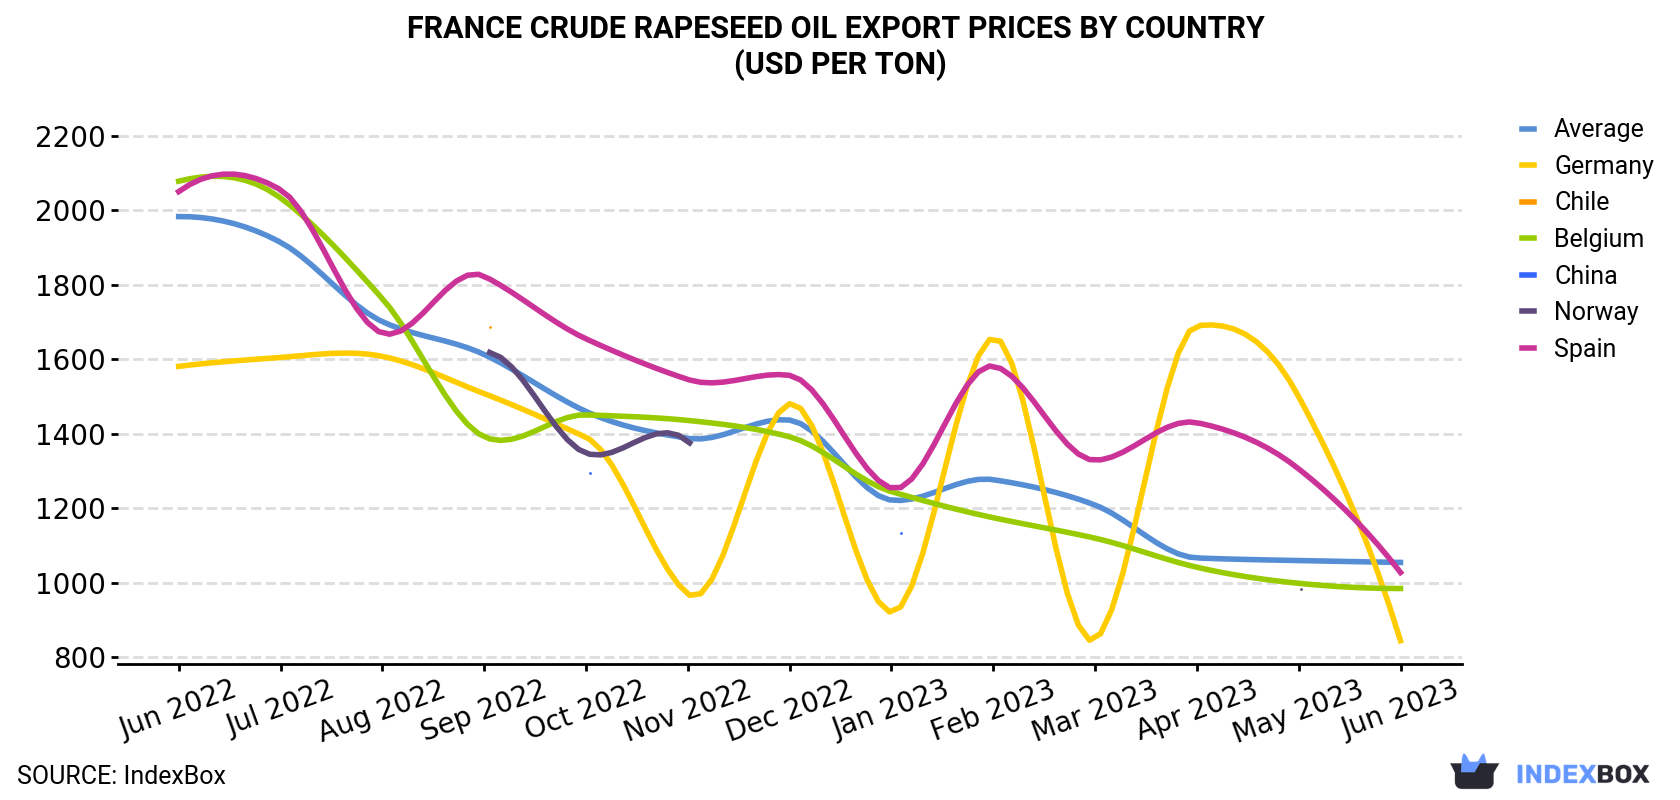 France Crude Rapeseed Oil Export Prices By Country (USD Per Ton)